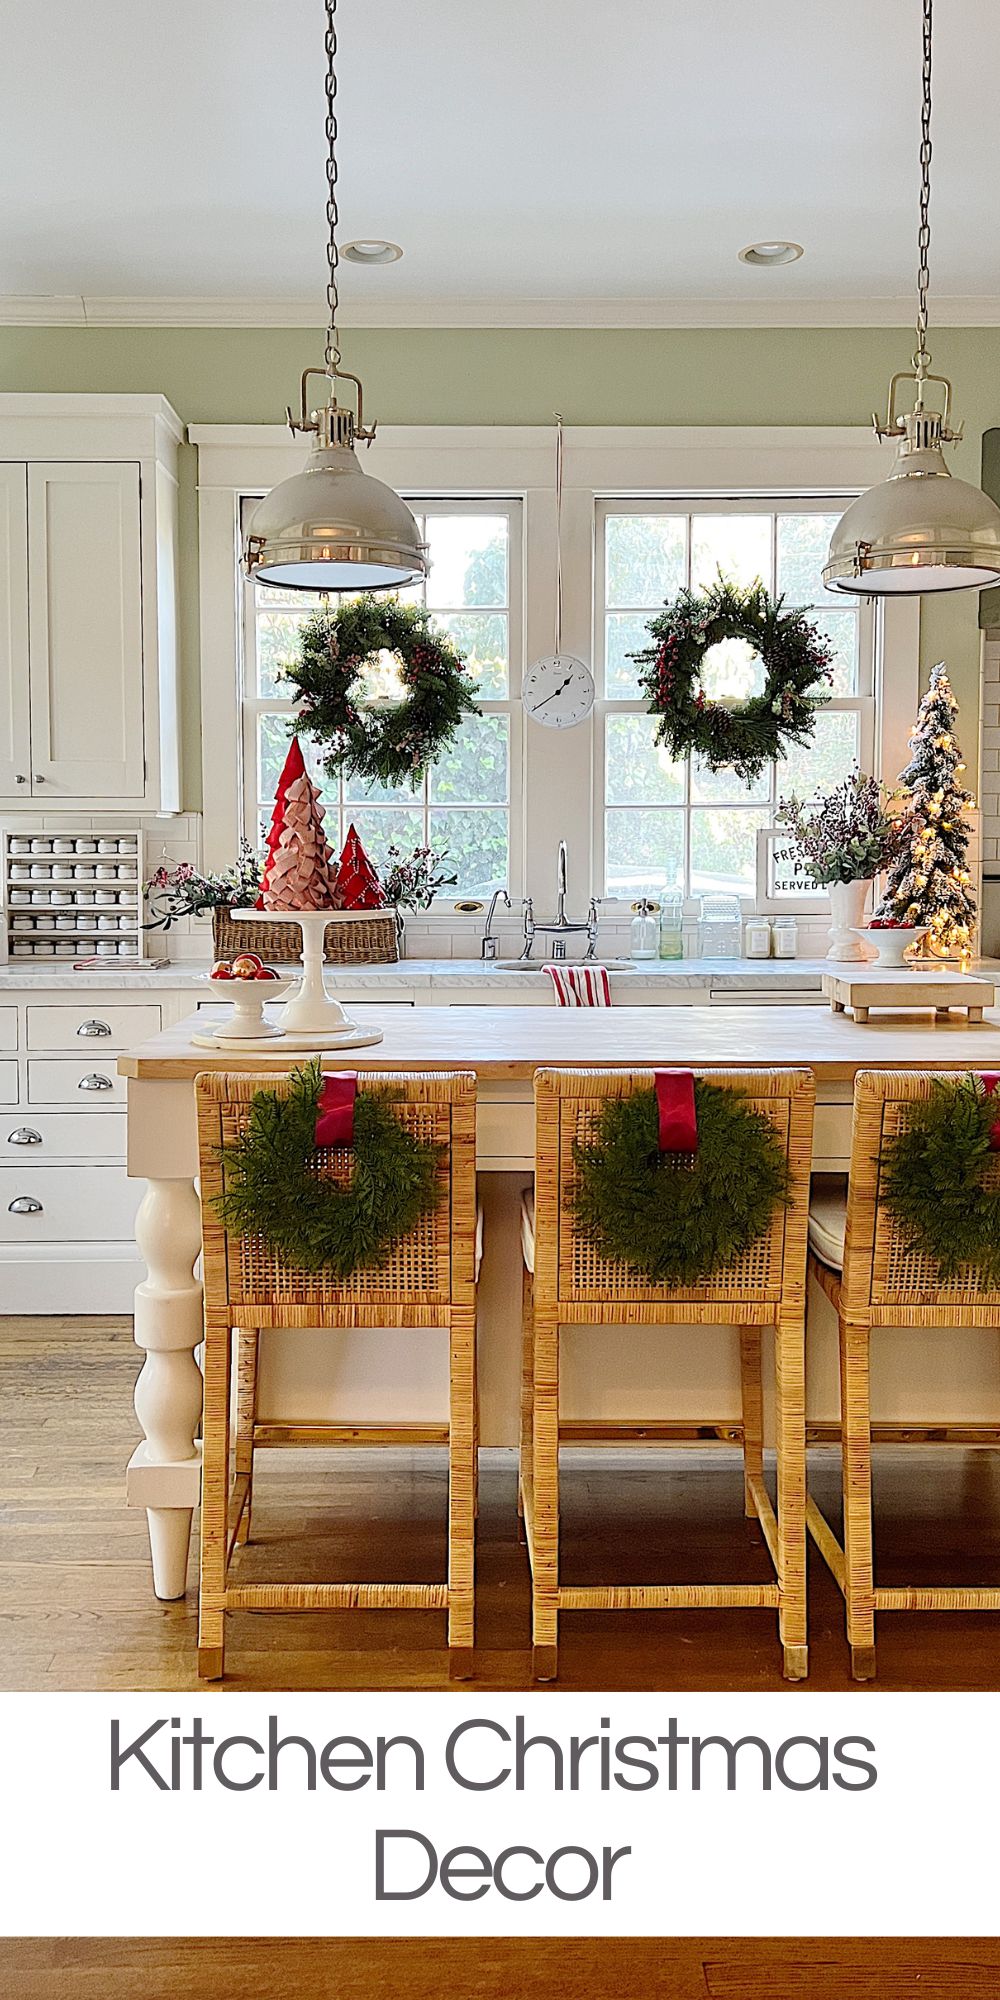 The holiday season is a time of warmth and joy, and I love to embody this spirit in the heart of the home with kitchen Christmas decor.